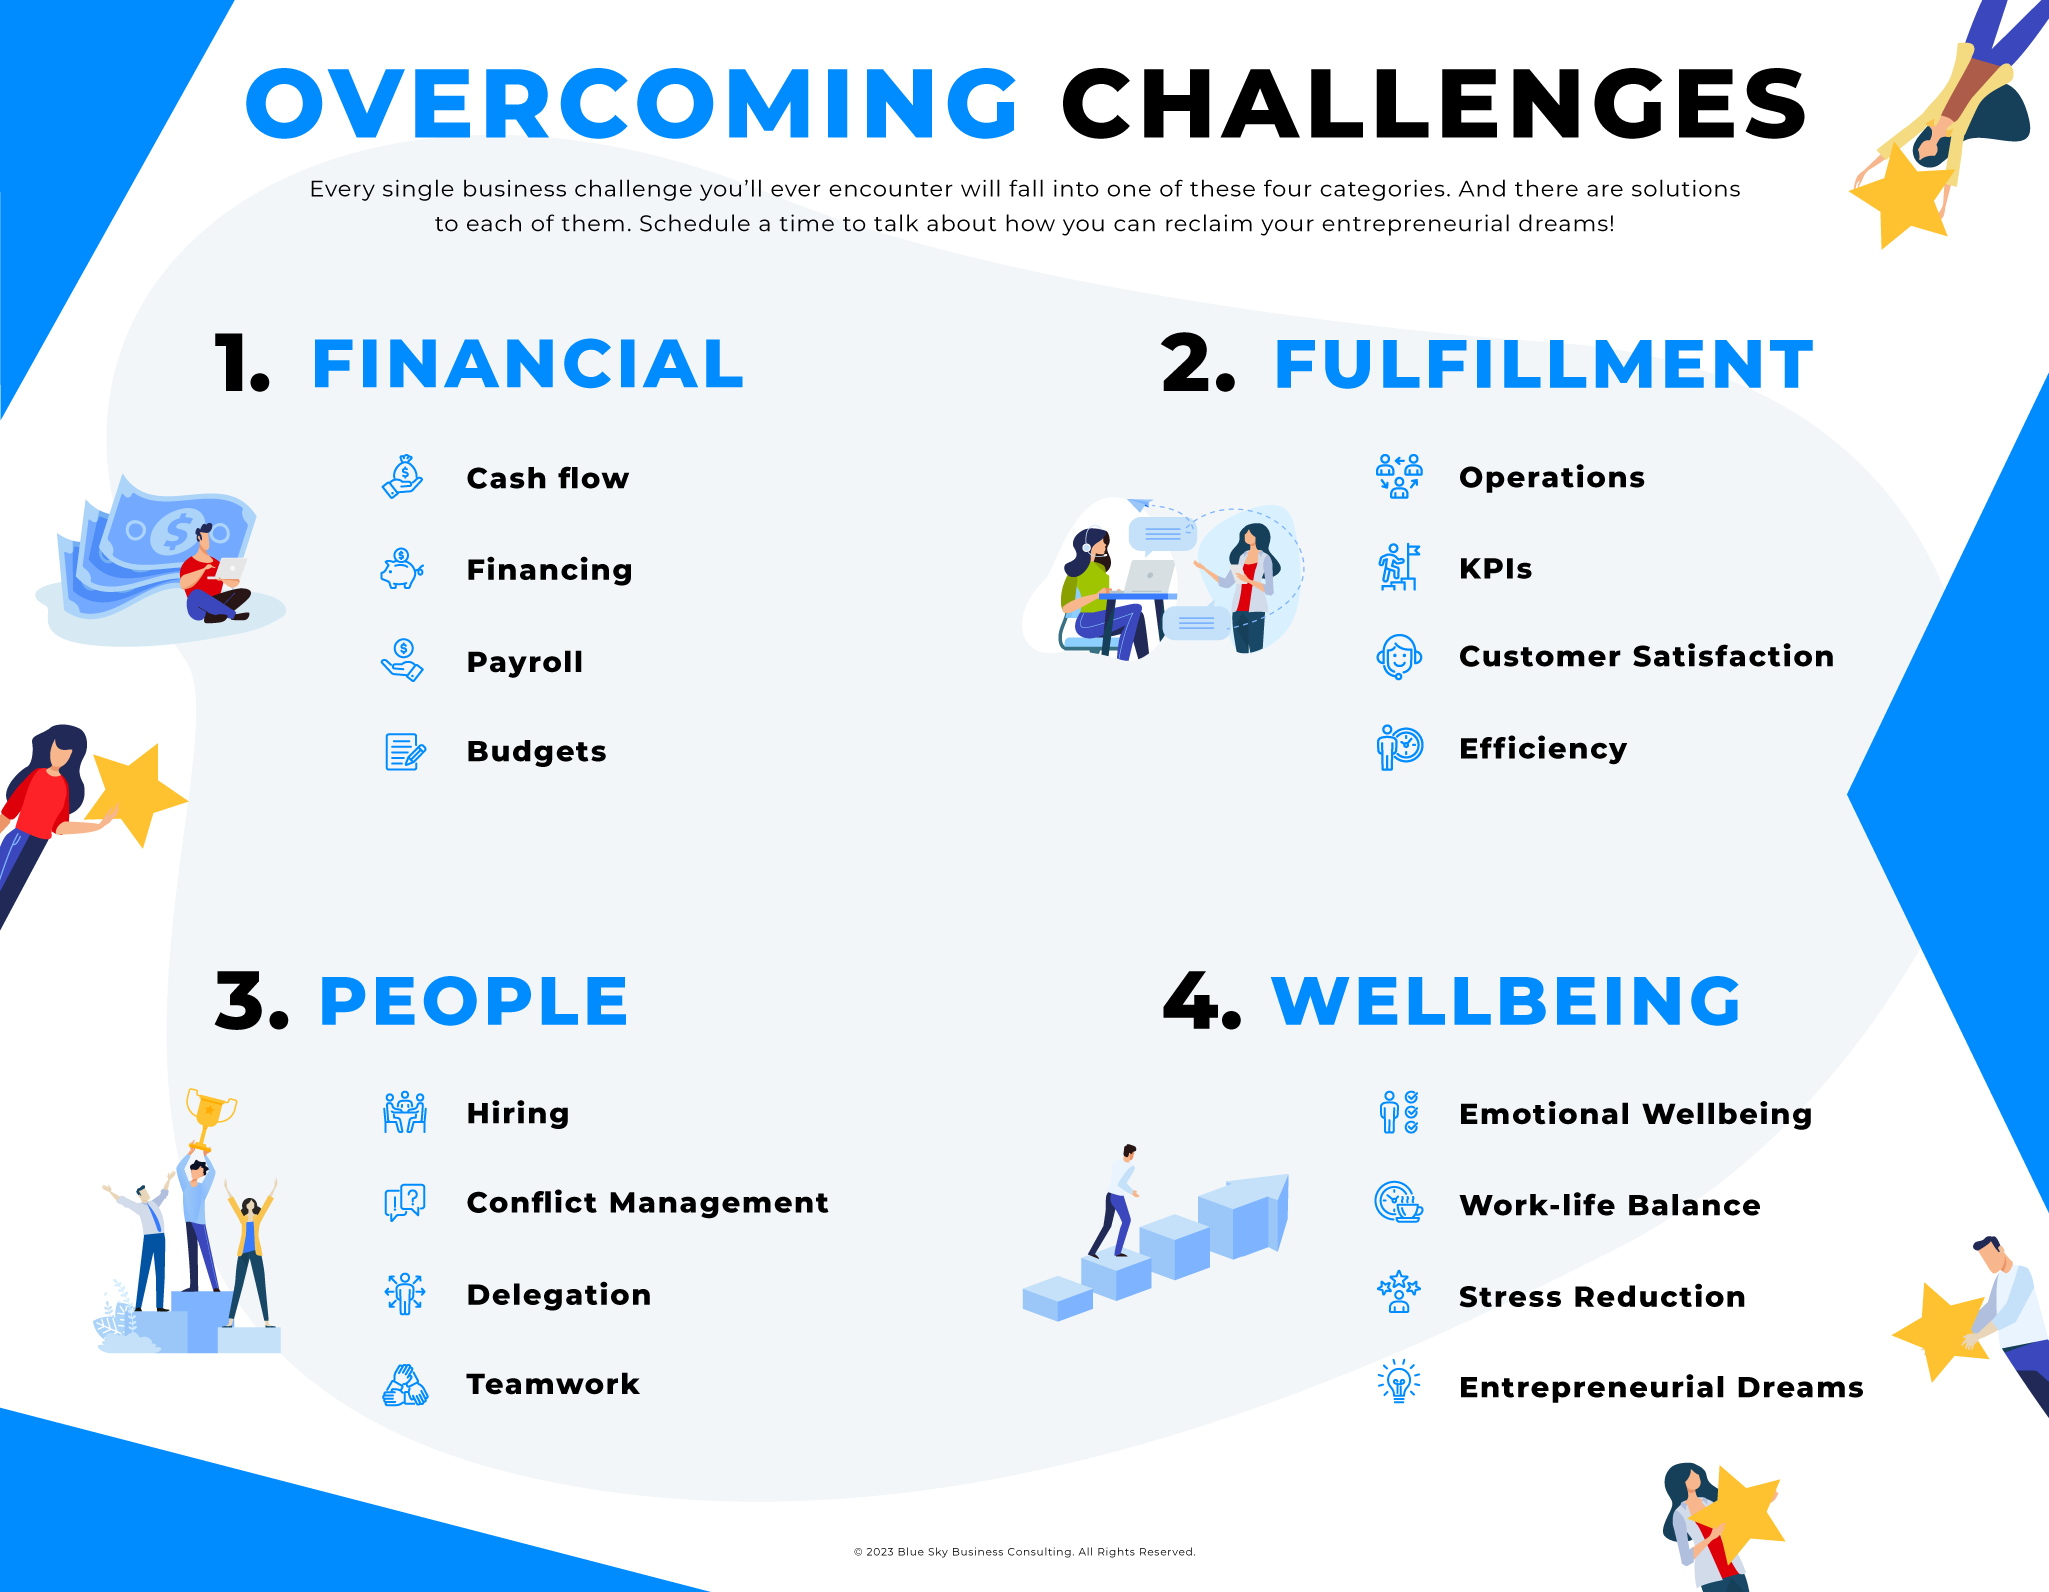 Infographic about overcoming business challenges like financial, fulfillment, people and wellbeing.